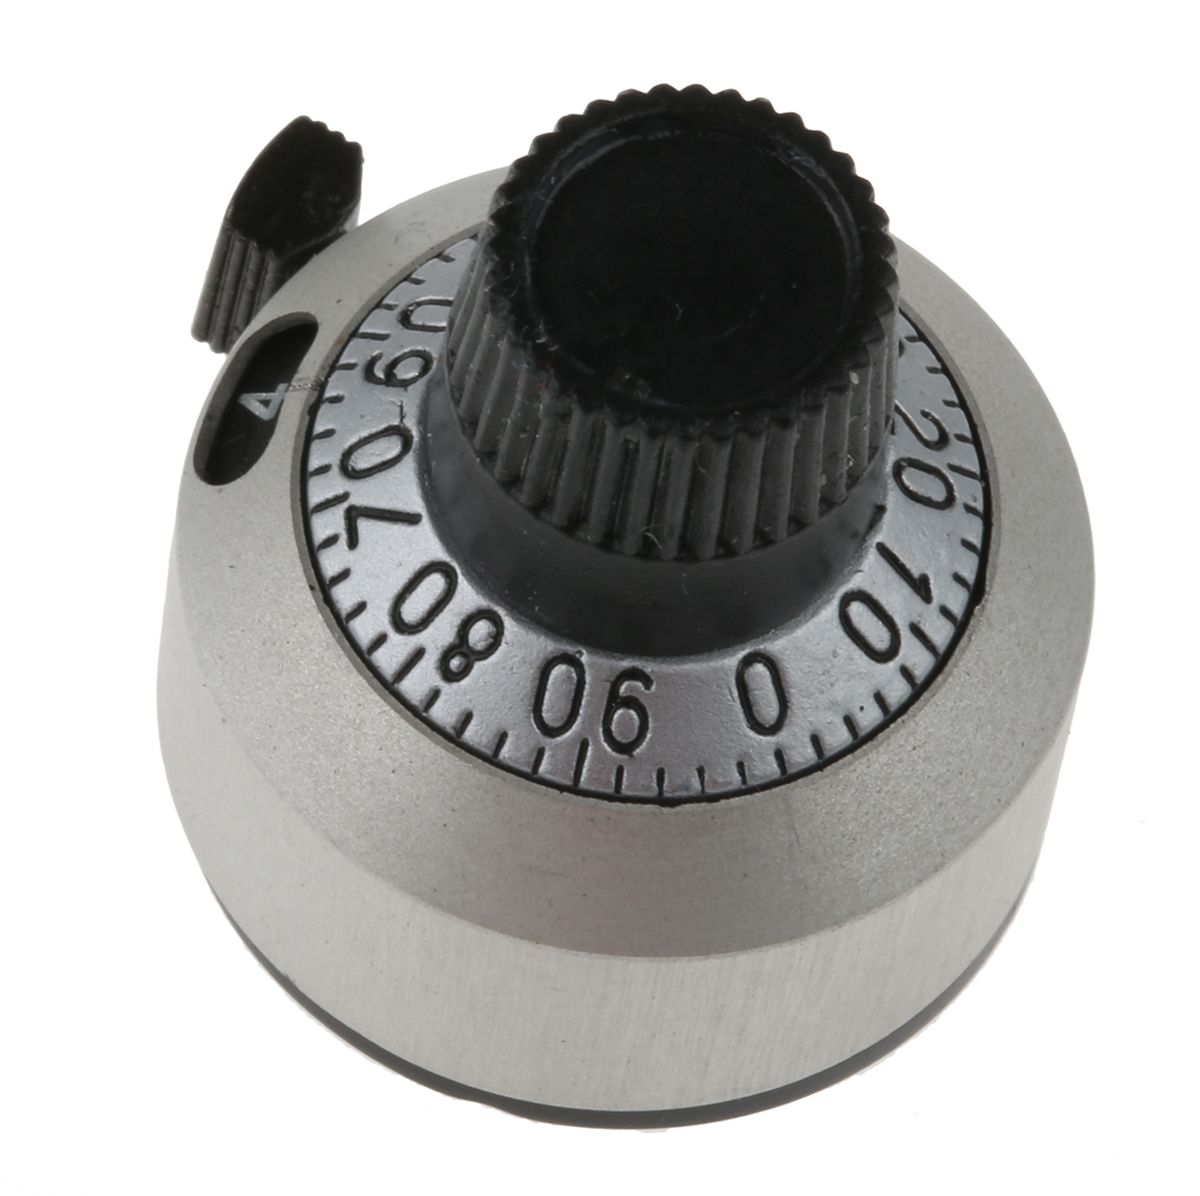 Vishay Rotary Switch Dial for use with Precision Potentiometers or Other Rotating Devices Up to 15 Turns